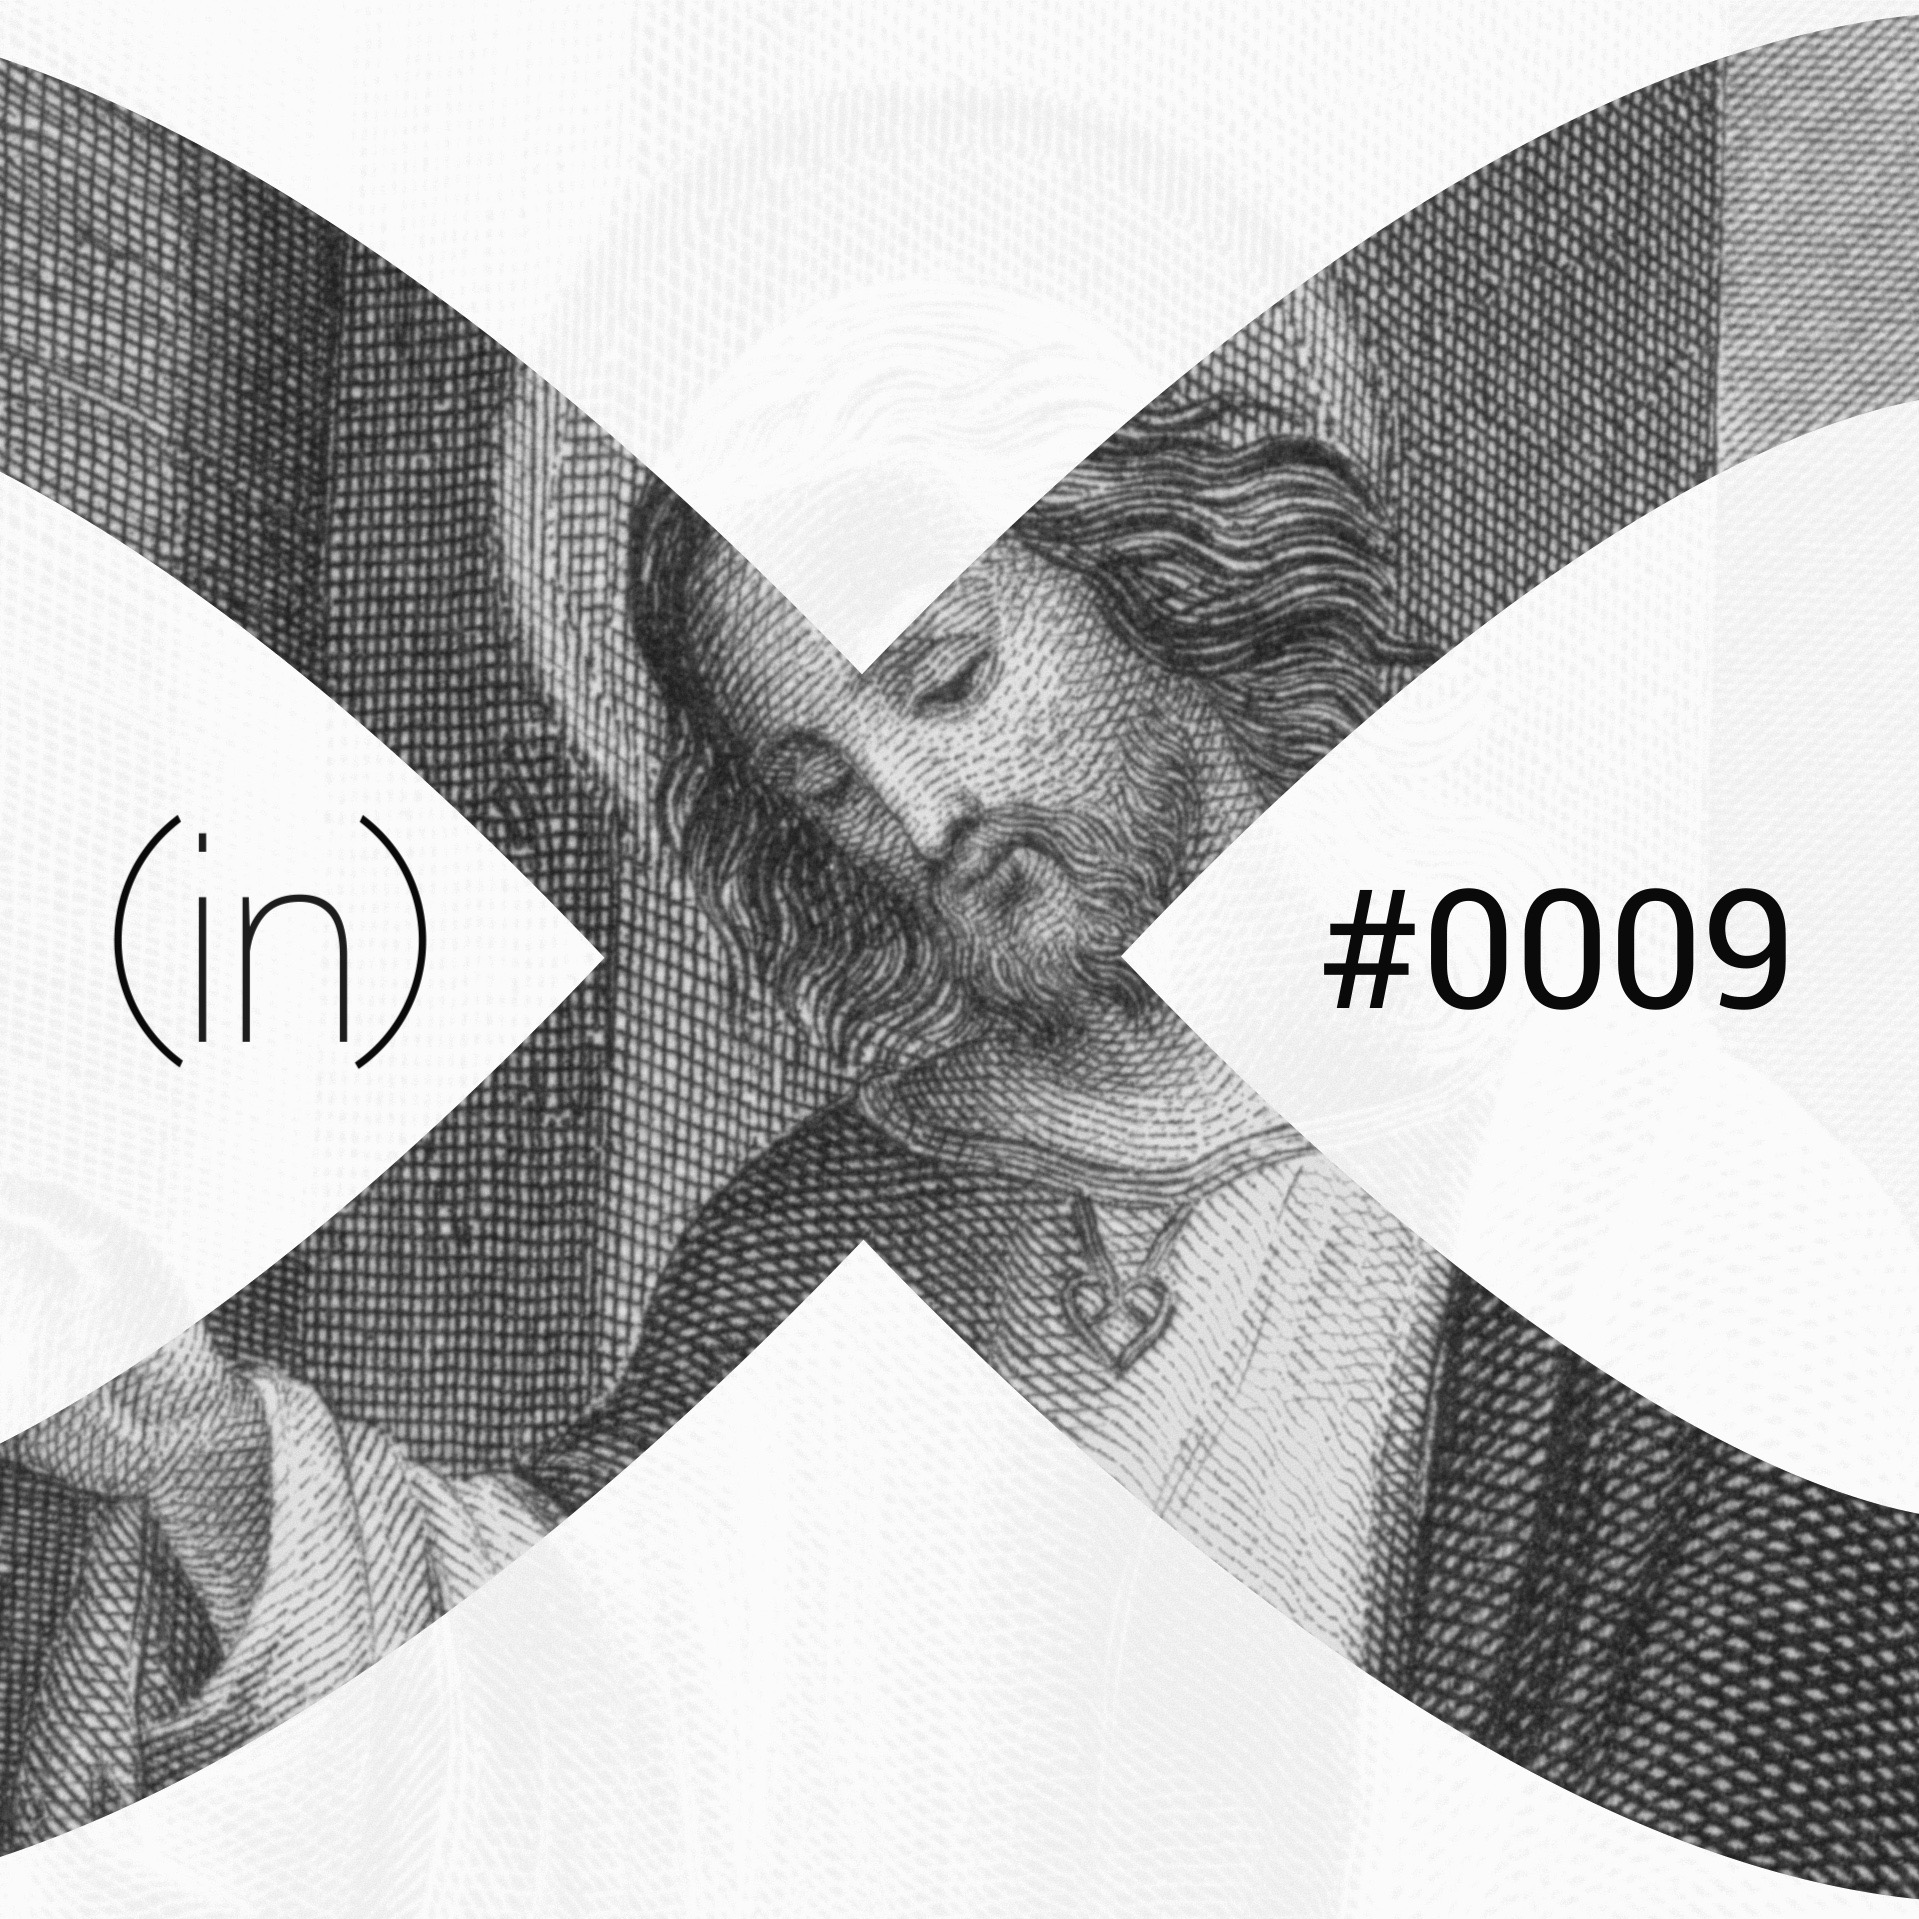 cover art for (in)009 - Which one of you is the messiah